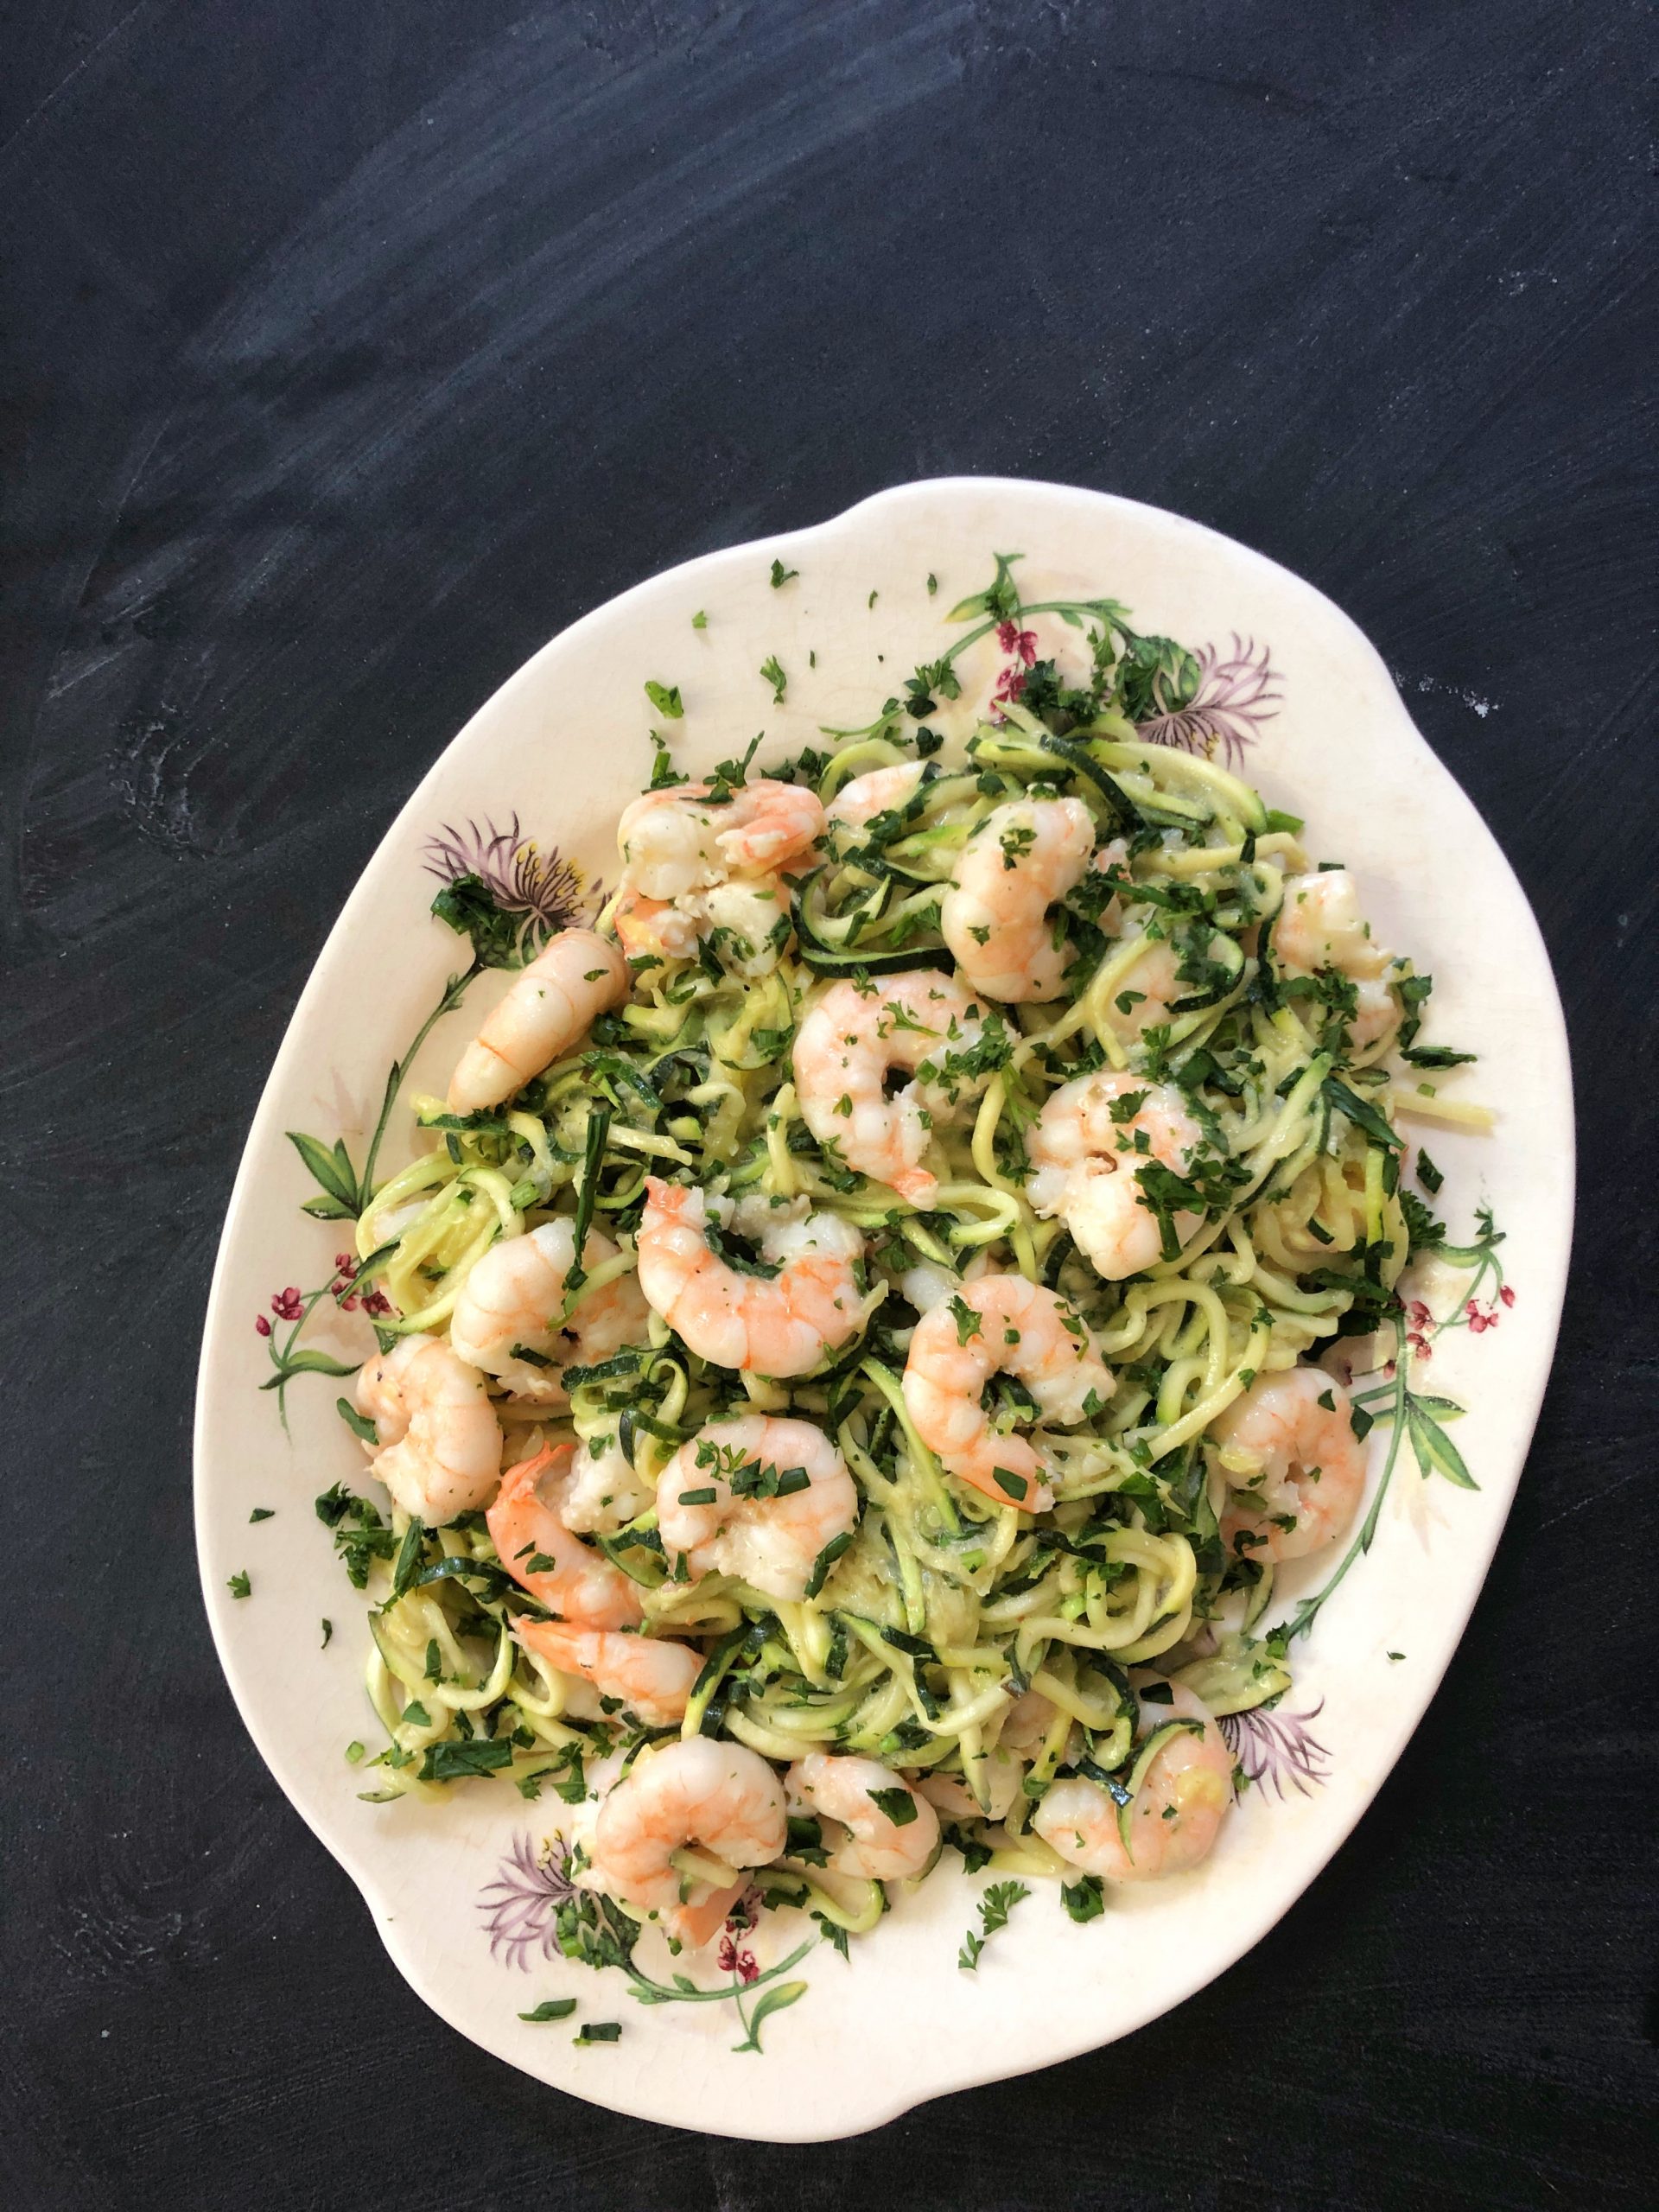 Shrimp Zucchini Noodles with Caramelized Onion and Sesame Seed Dressing